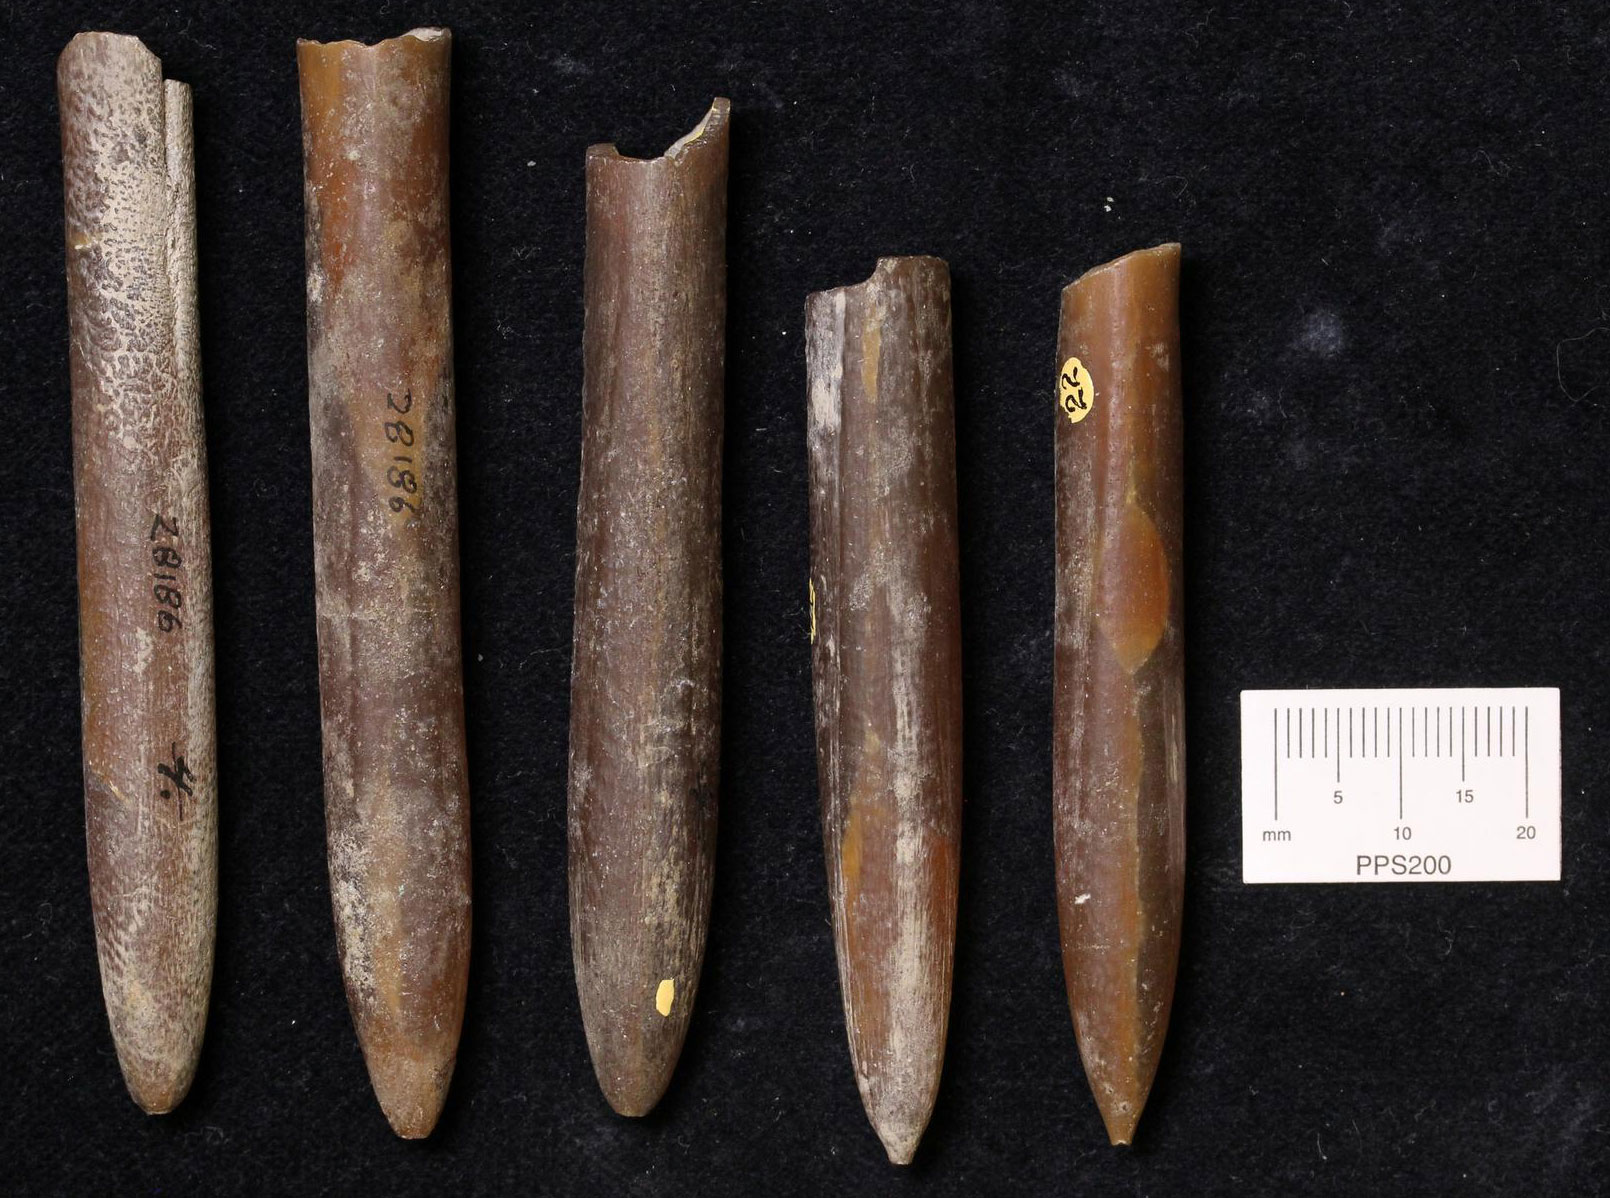 Photograph of belemnites from the Cretaceous of New Jersey. The photo shows five belemnite fossils in a row. The fossils are brown in color and cylindrical in shape with one tapered end.